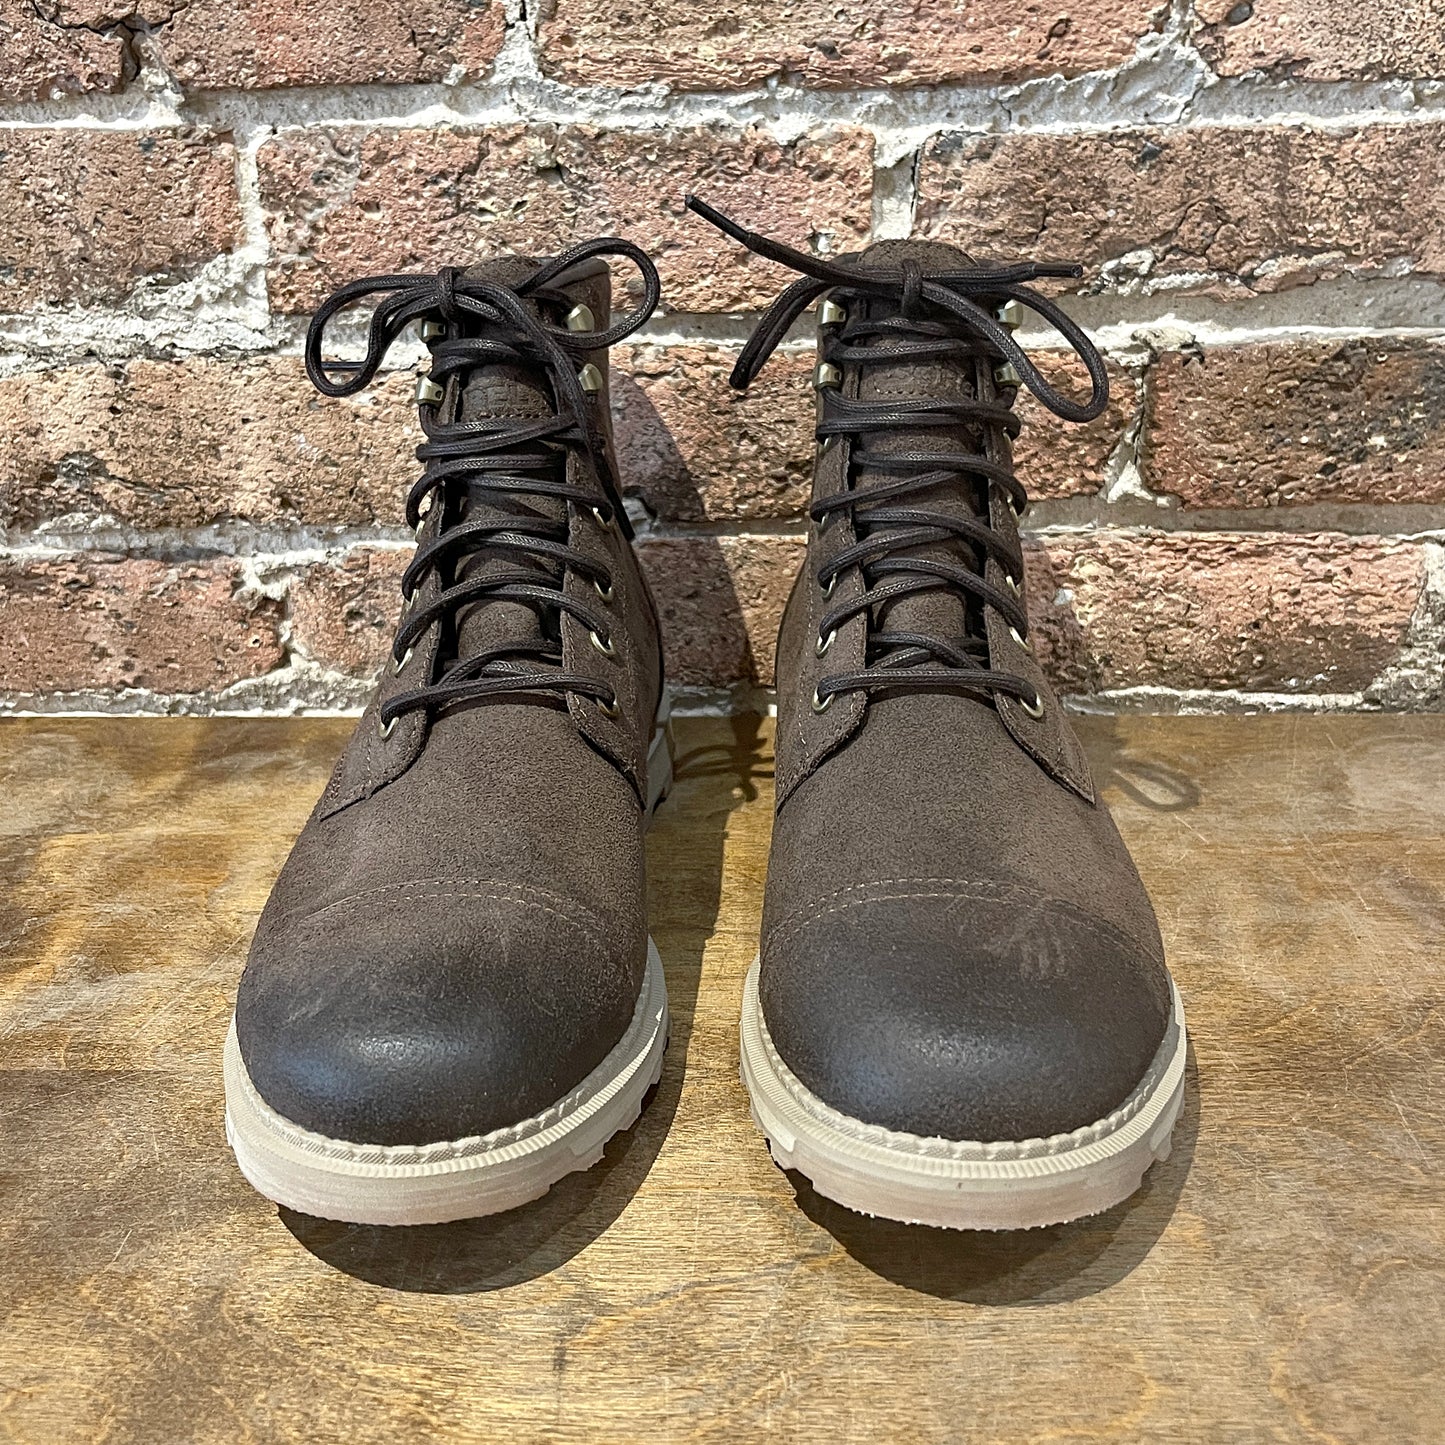 Men's Madson II Chore Boots